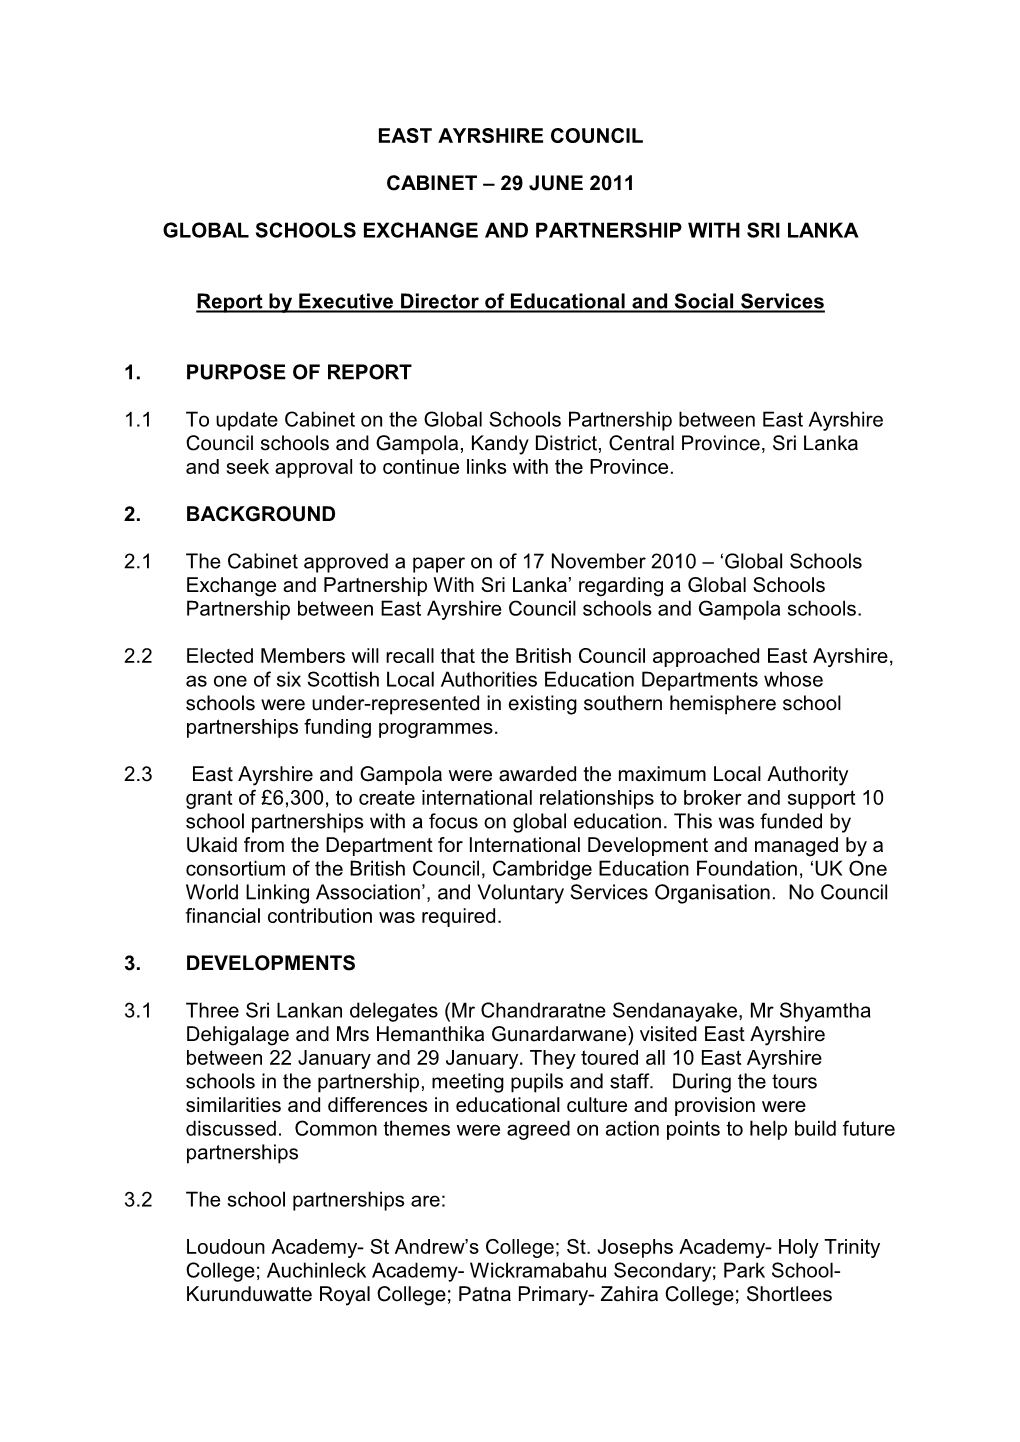 EAST AYRSHIRE COUNCIL CABINET – 29 JUNE 2011 GLOBAL SCHOOLS EXCHANGE and PARTNERSHIP with SRI LANKA Report by Executive Direct